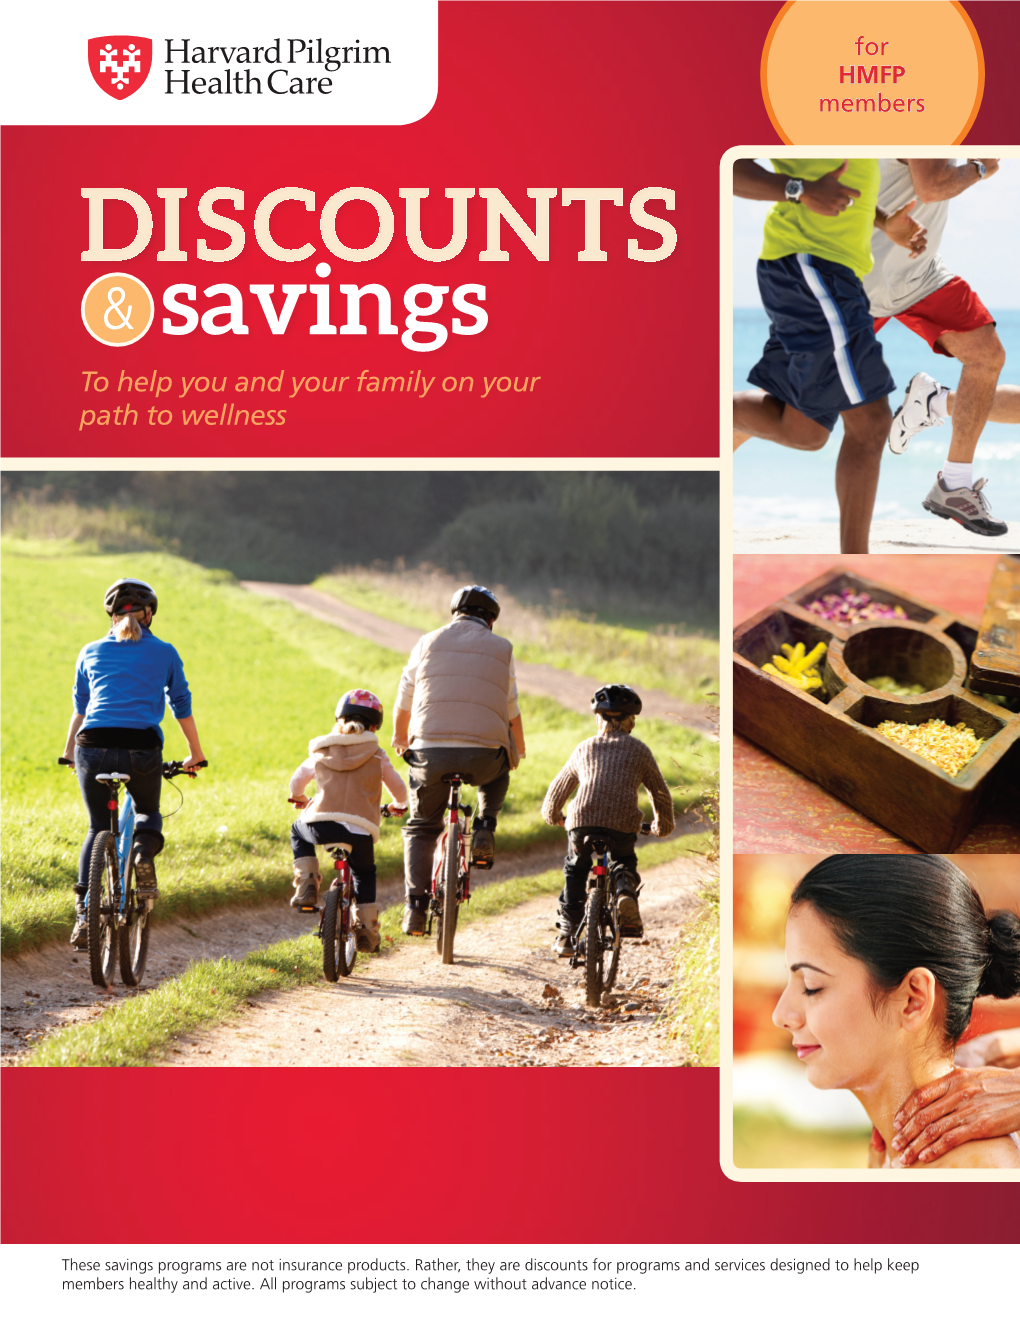 DISCOUNTS & Savings to Help You and Your Family on Your Path to Wellness